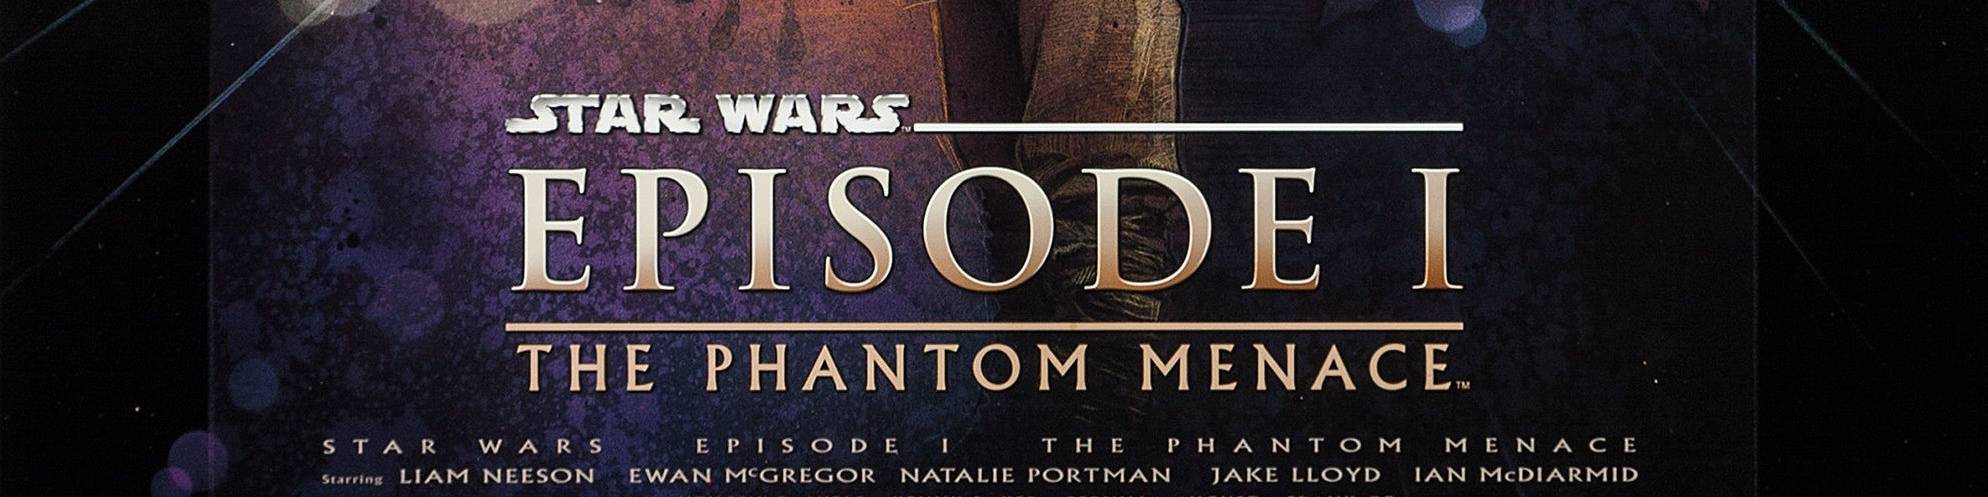 © 1999 Lucasfilm – Title on the _Star Wars: The Phantom Menace_ one sheet – Click the image to see the complete poster on IMPAwards.